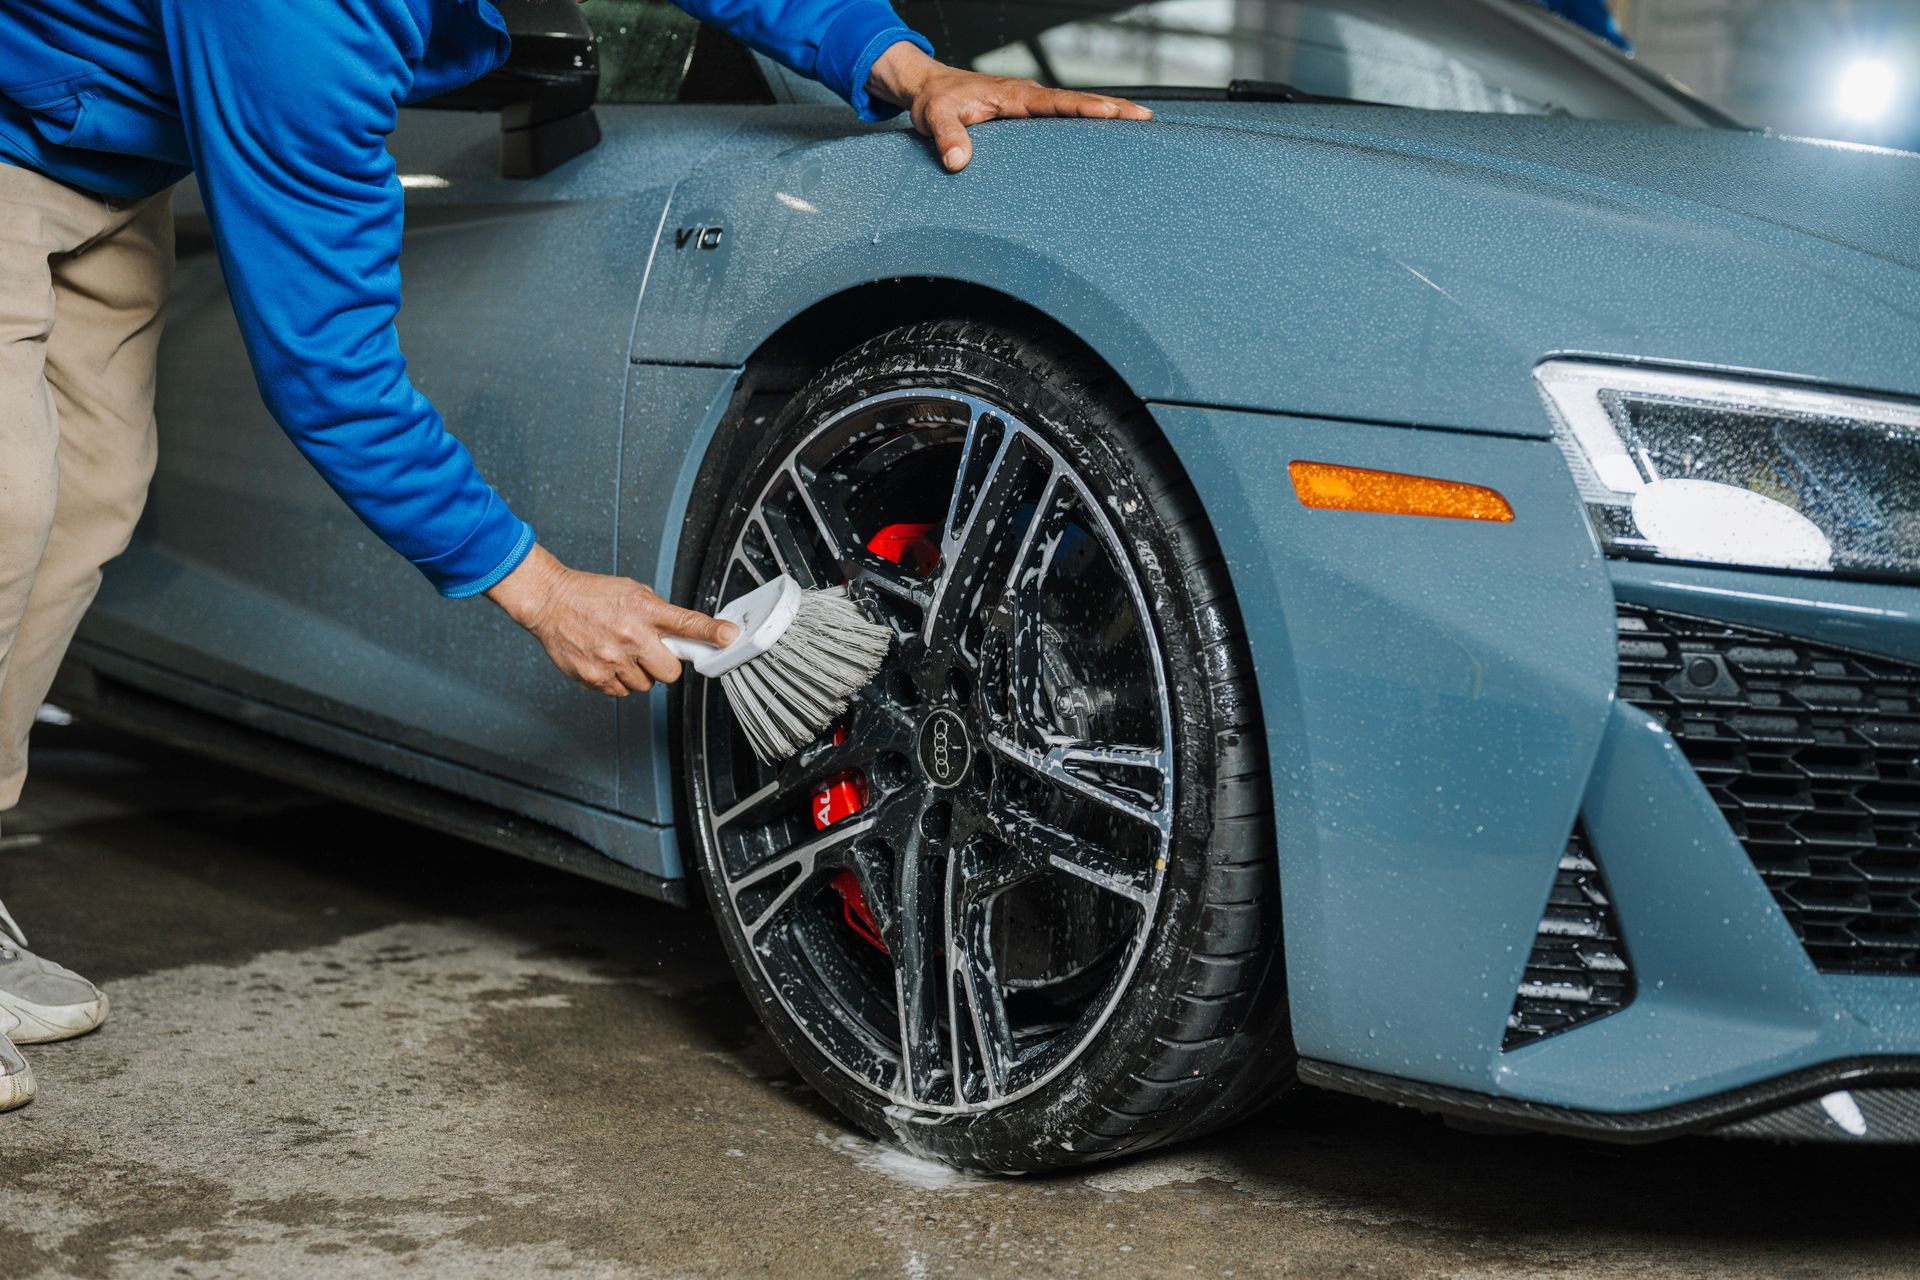 A man is cleaning the wheel of a car with a brush.